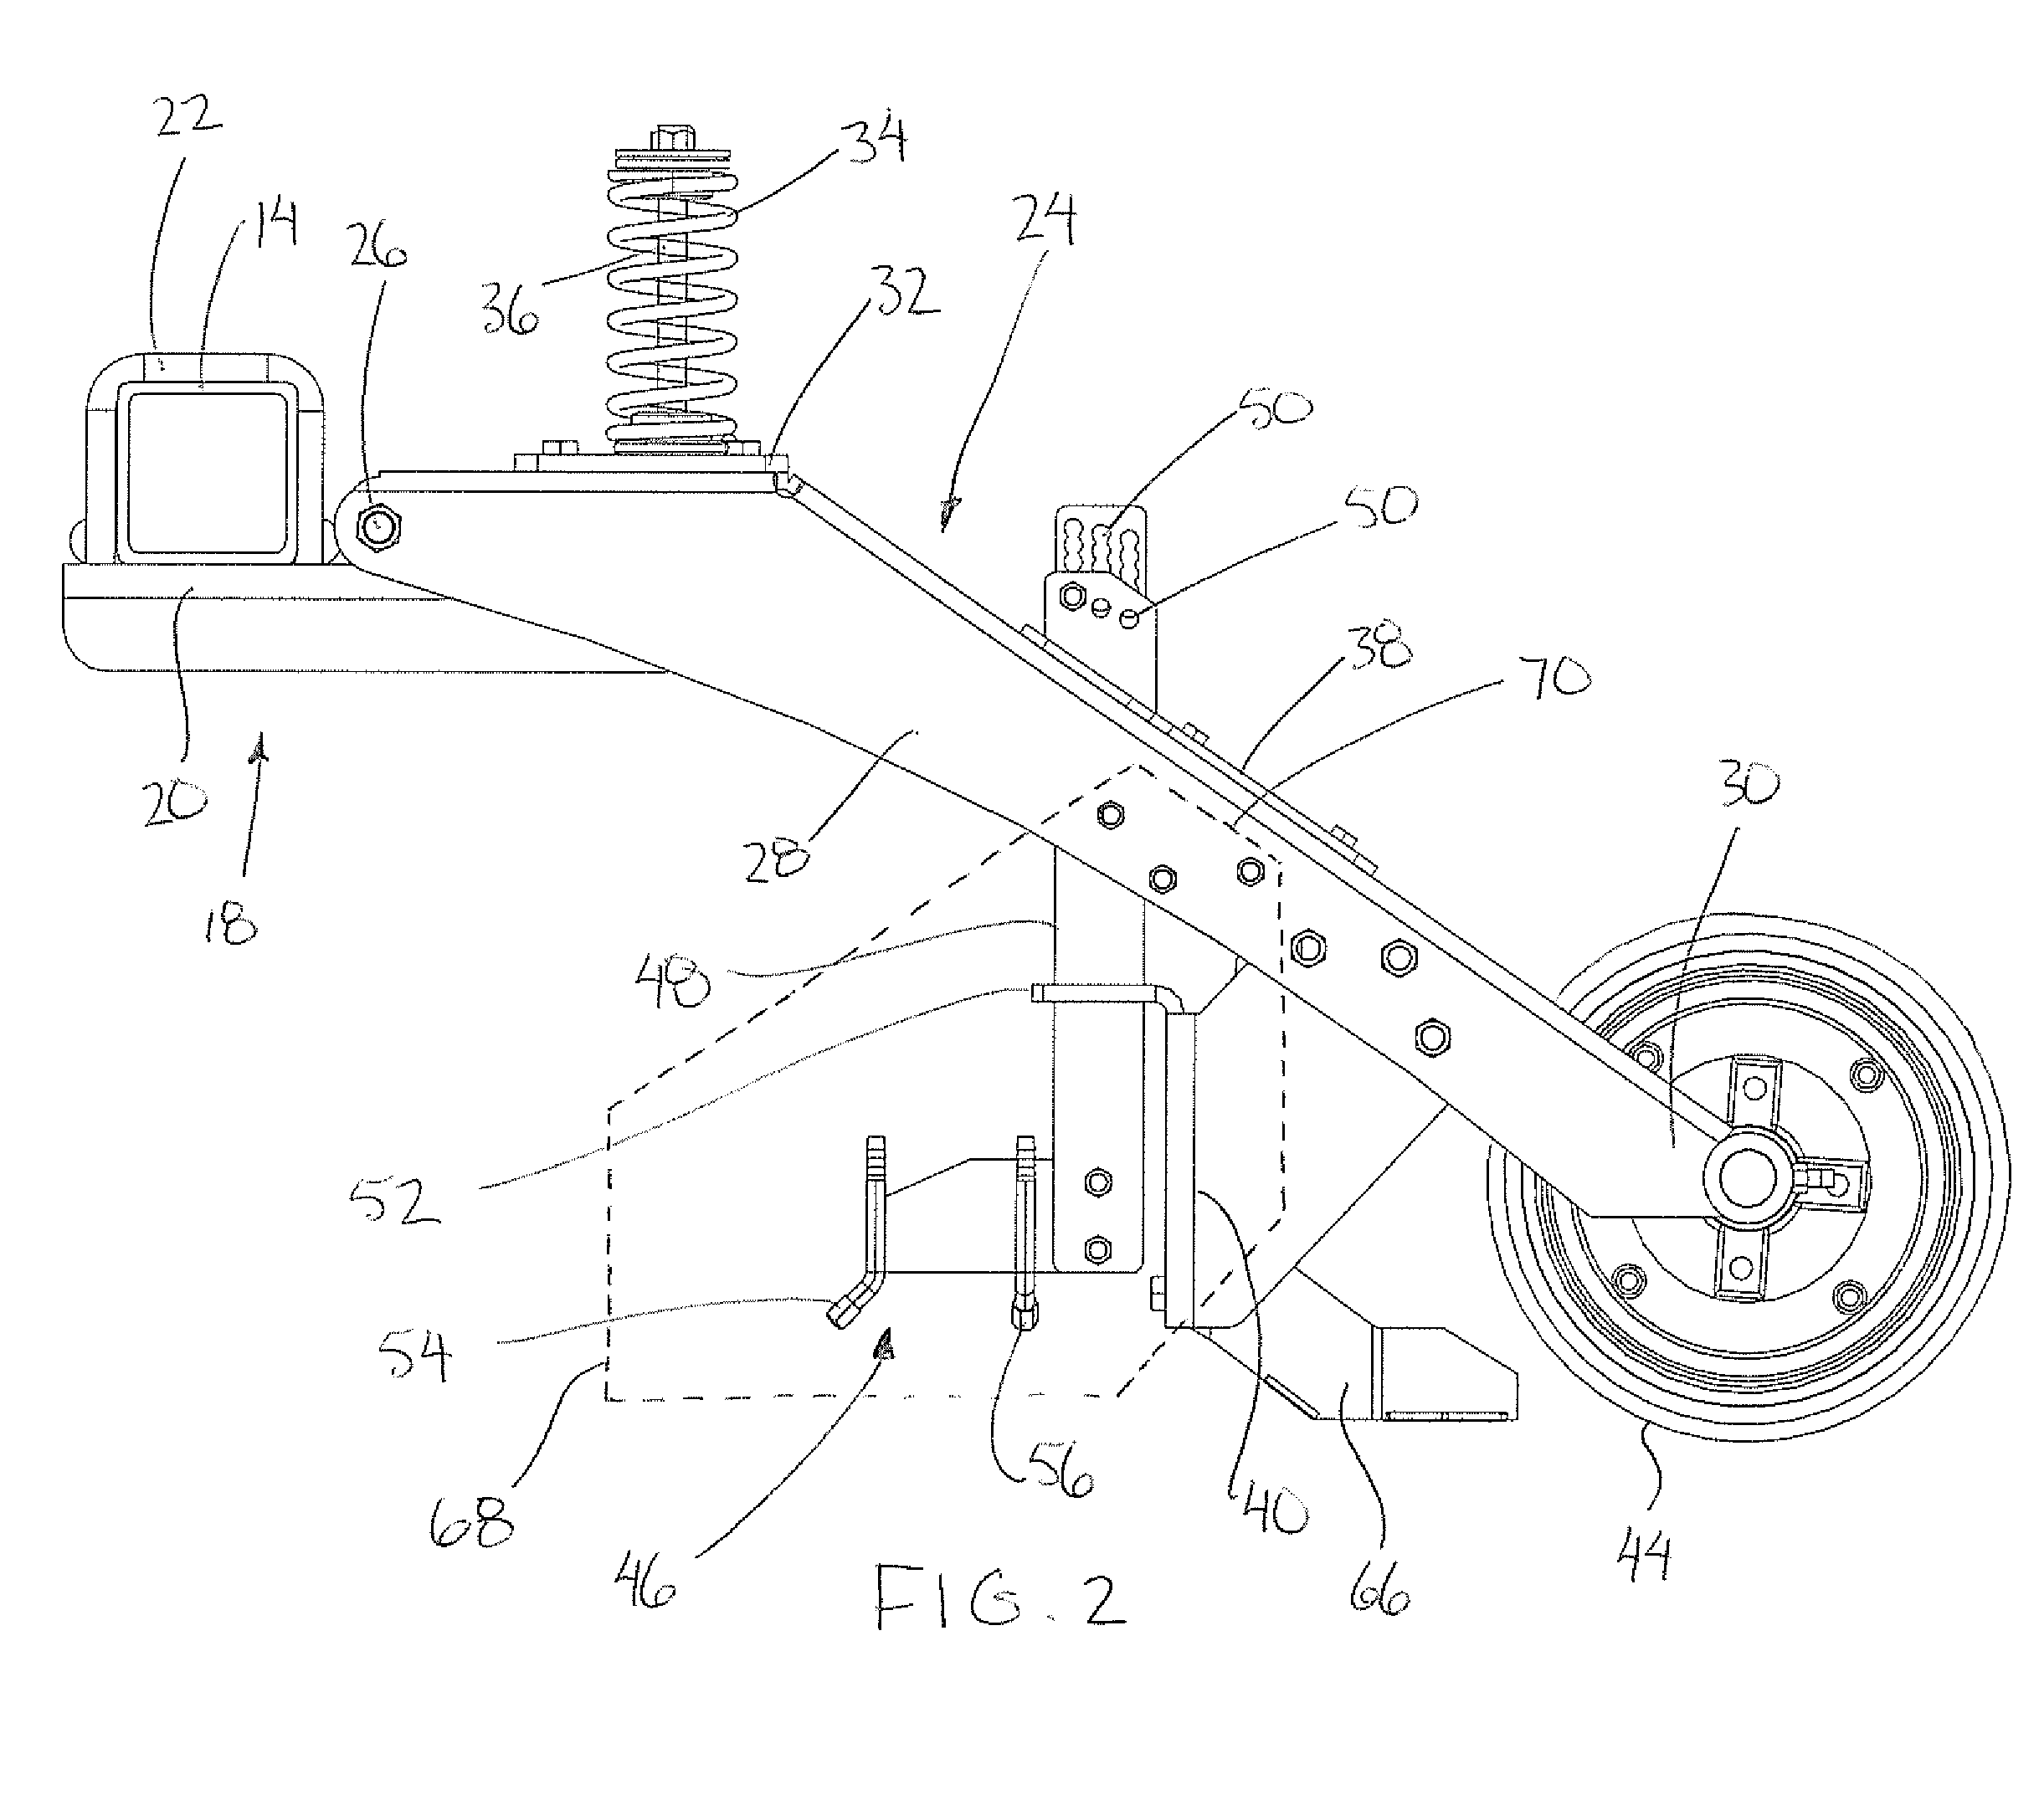 Liquid Furrowing Device for Seeding Implement